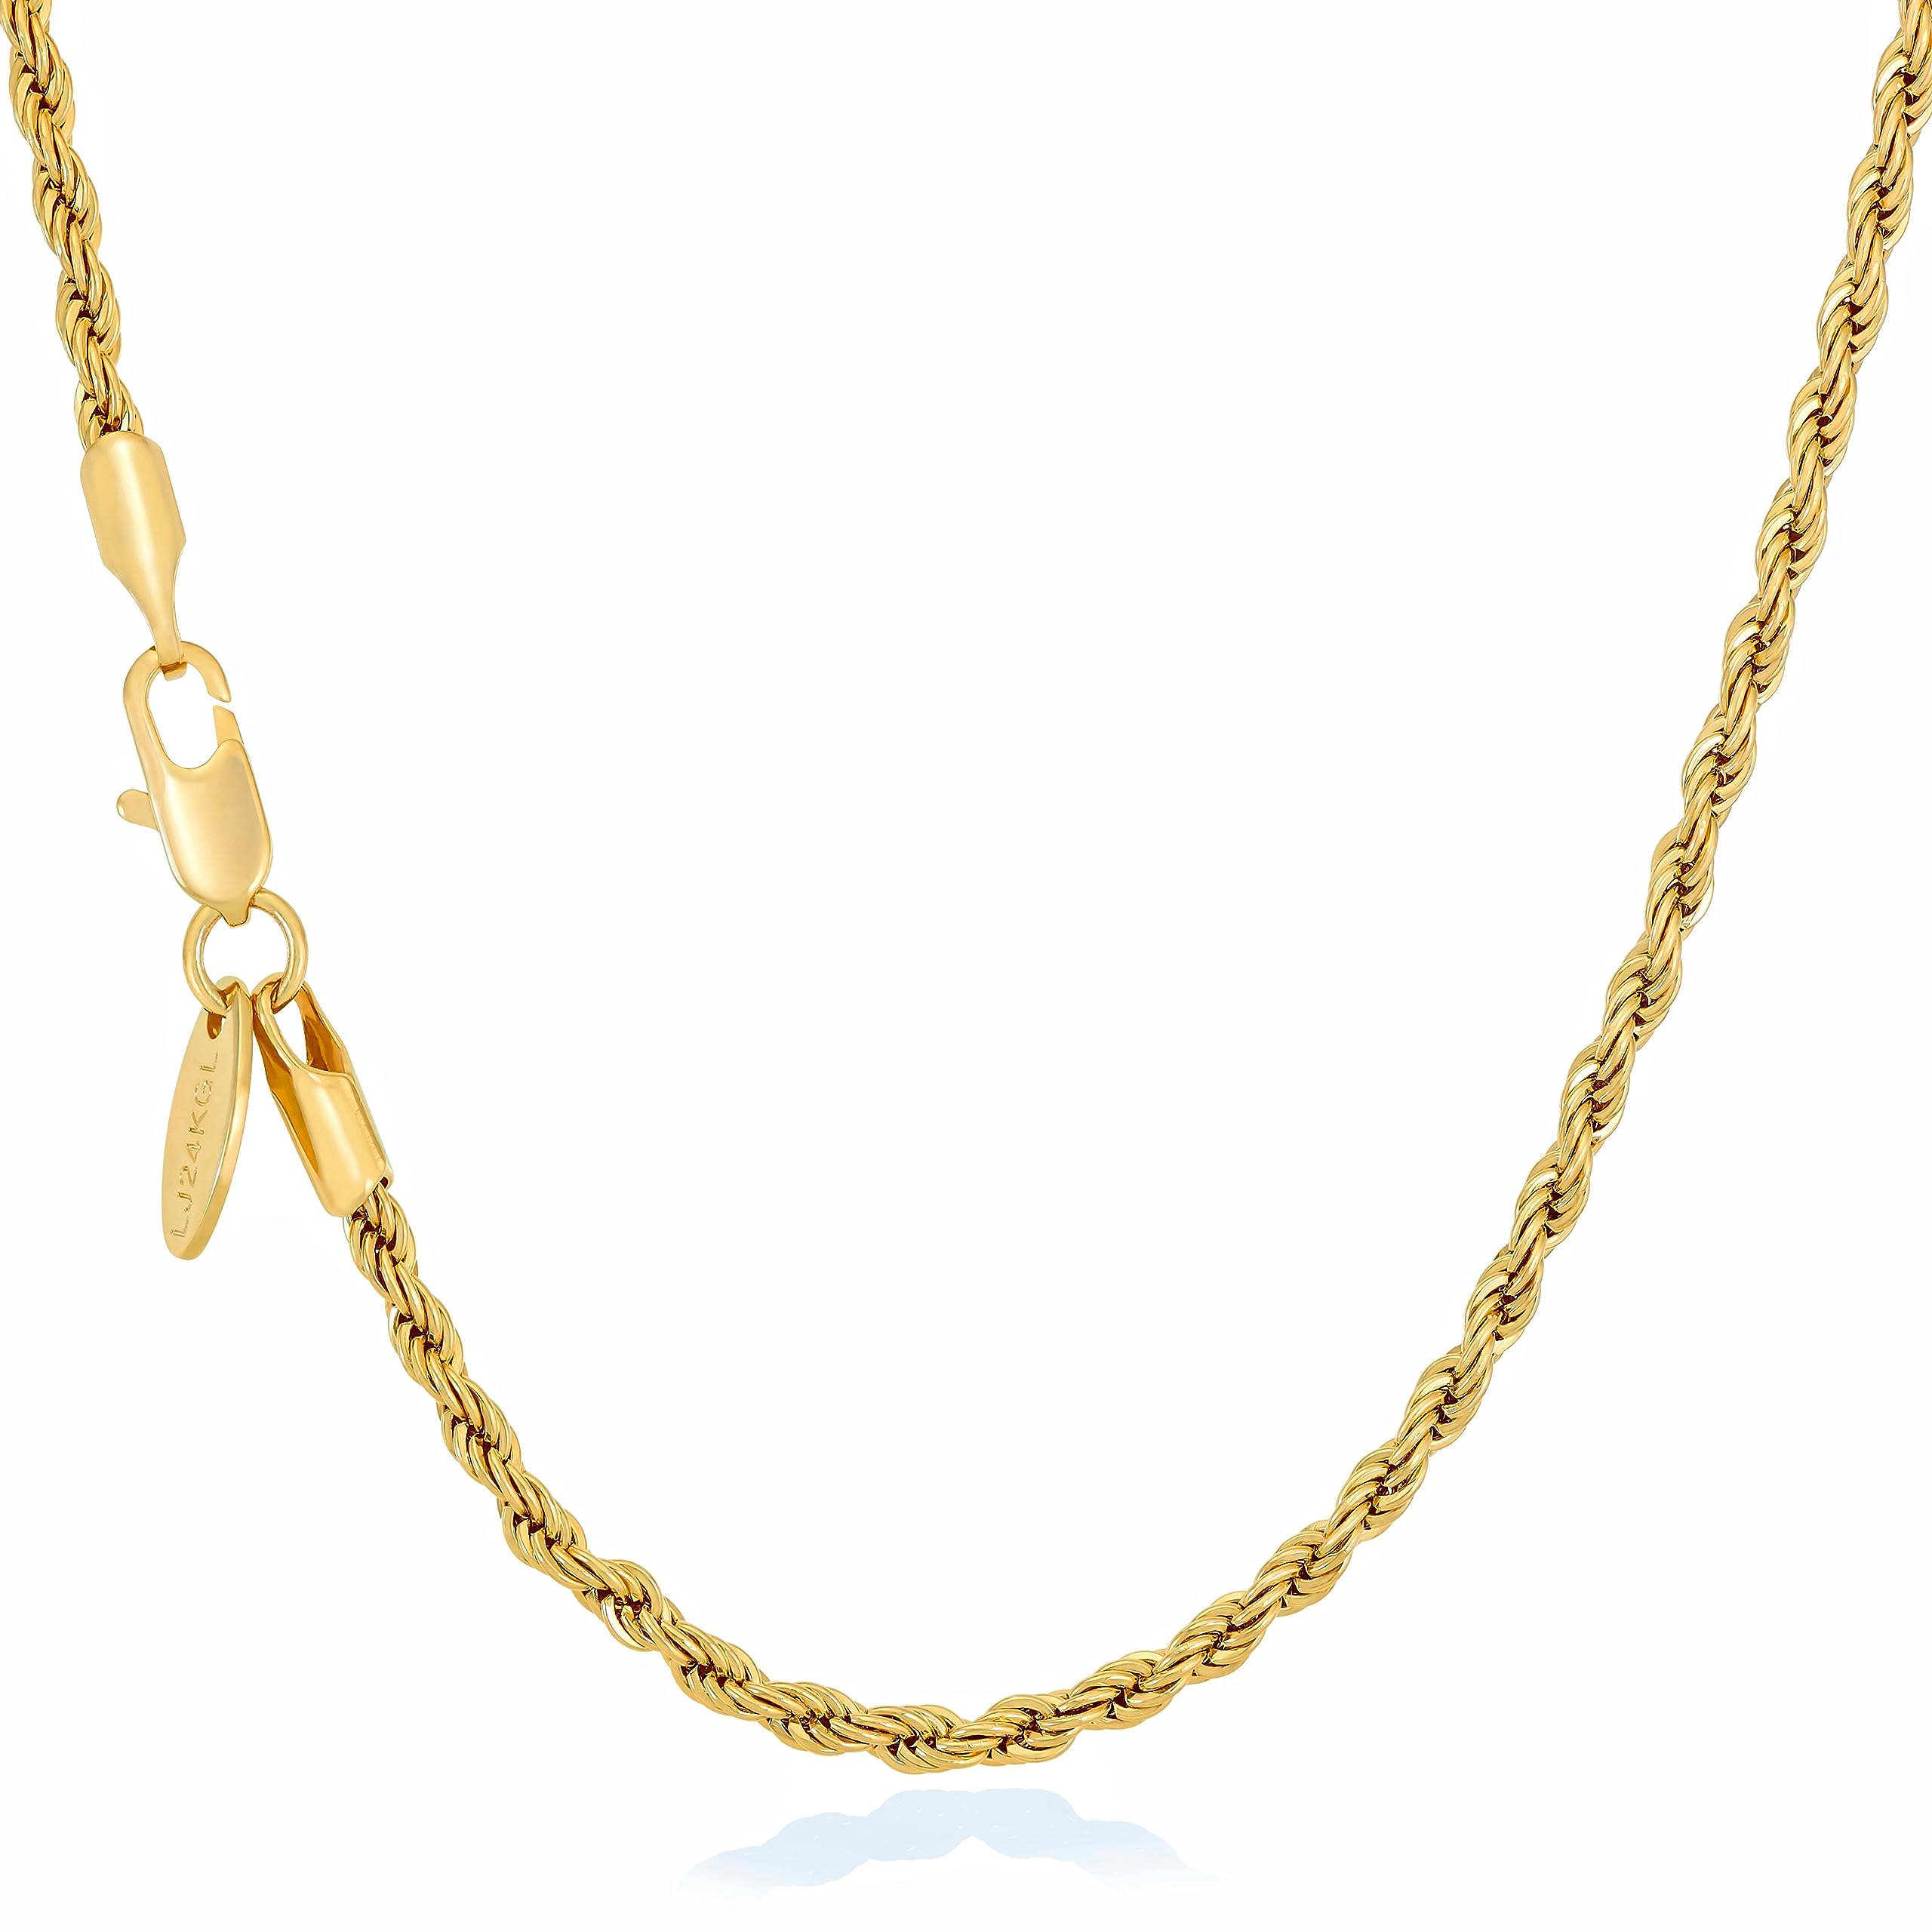 10K Yellow Gold 3.25MM Curb Chain Necklace 18 Inches - AU694A | JTV.com